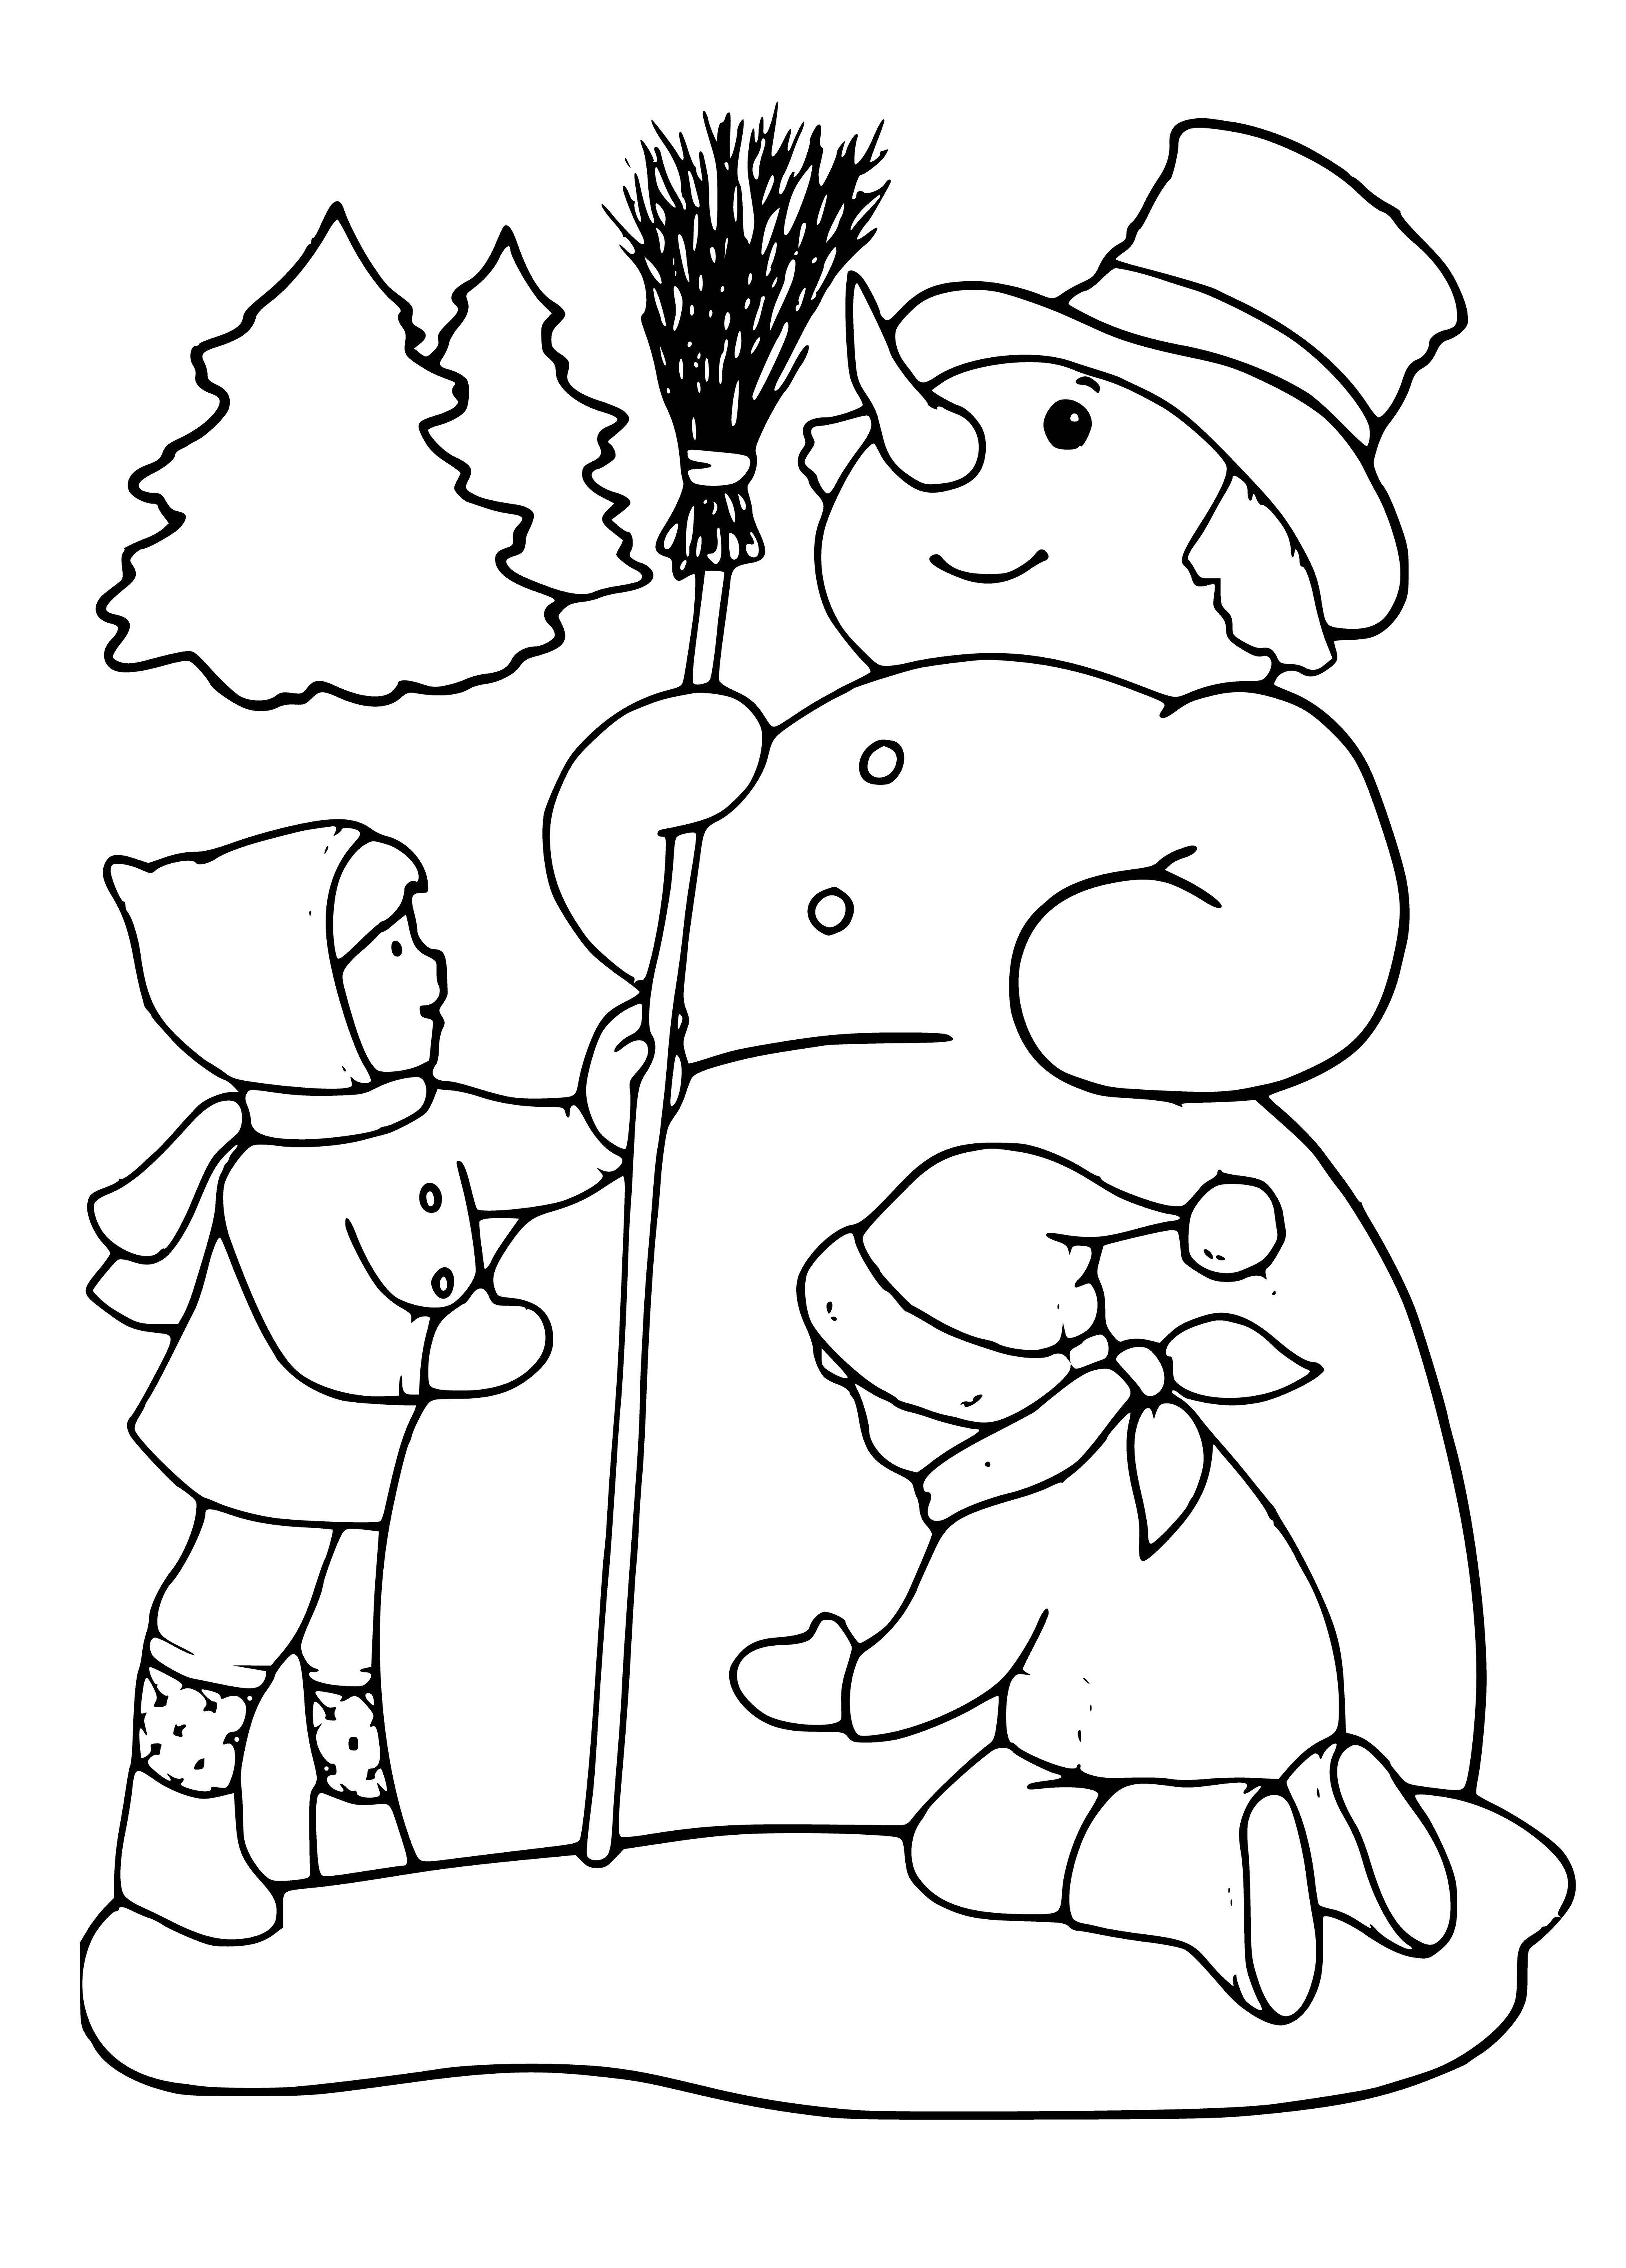 Three kids, snowman with a carrot nose, coal eyes, wearing hats & scarves. Kids hold hands. Snowman also wears a scarf.